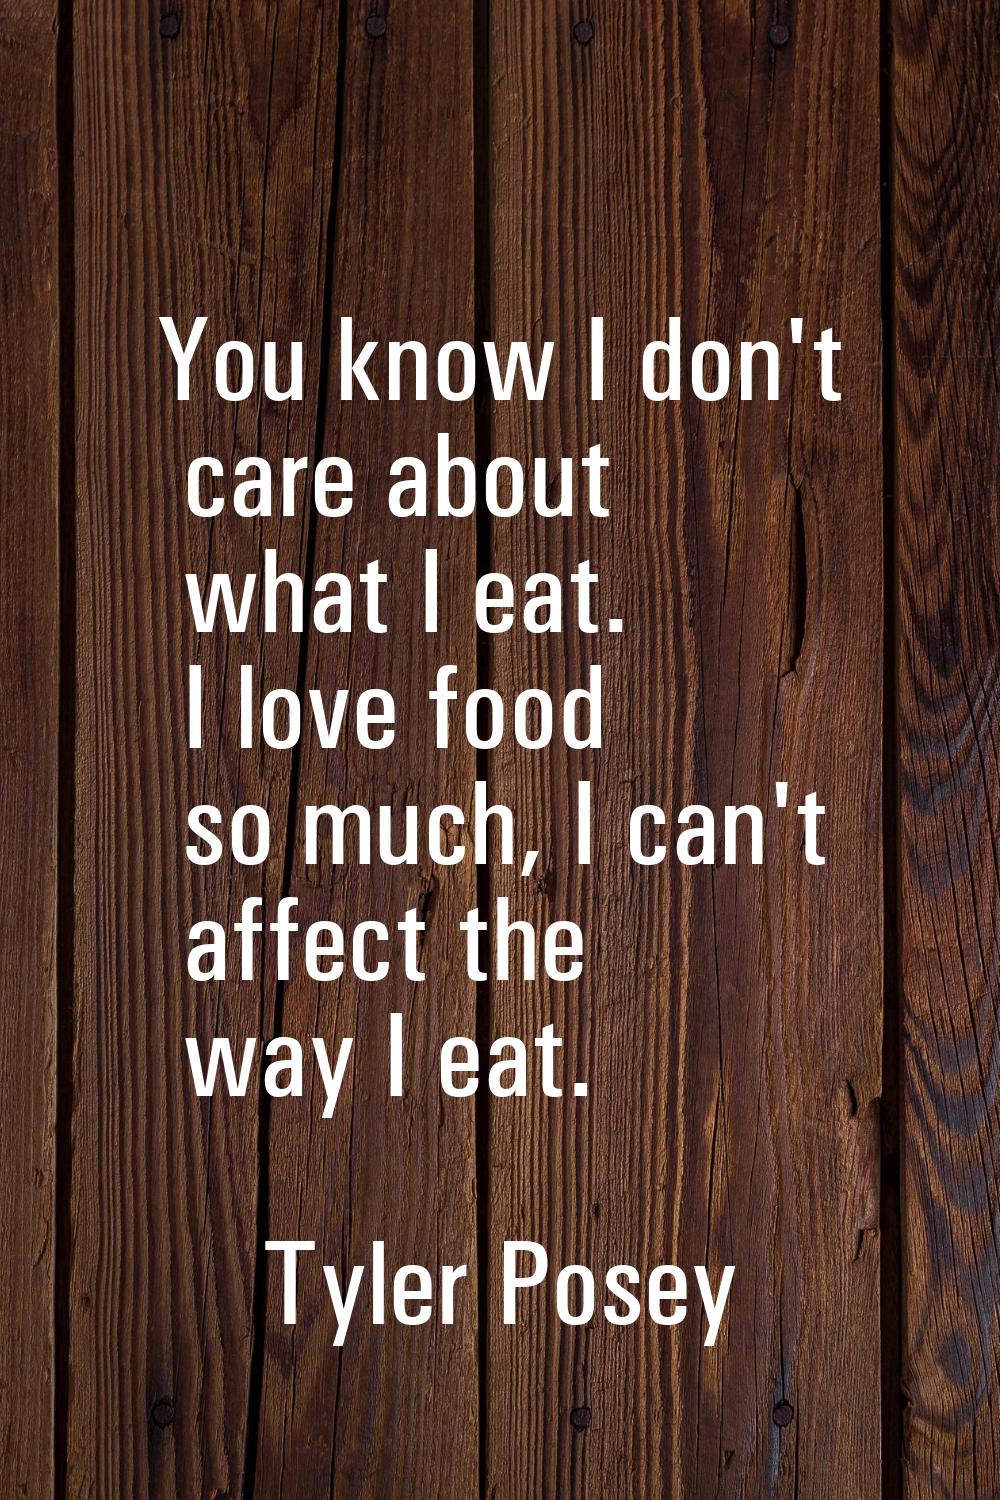 You know I don't care about what I eat. I love food so much, I can't affect the way I eat.